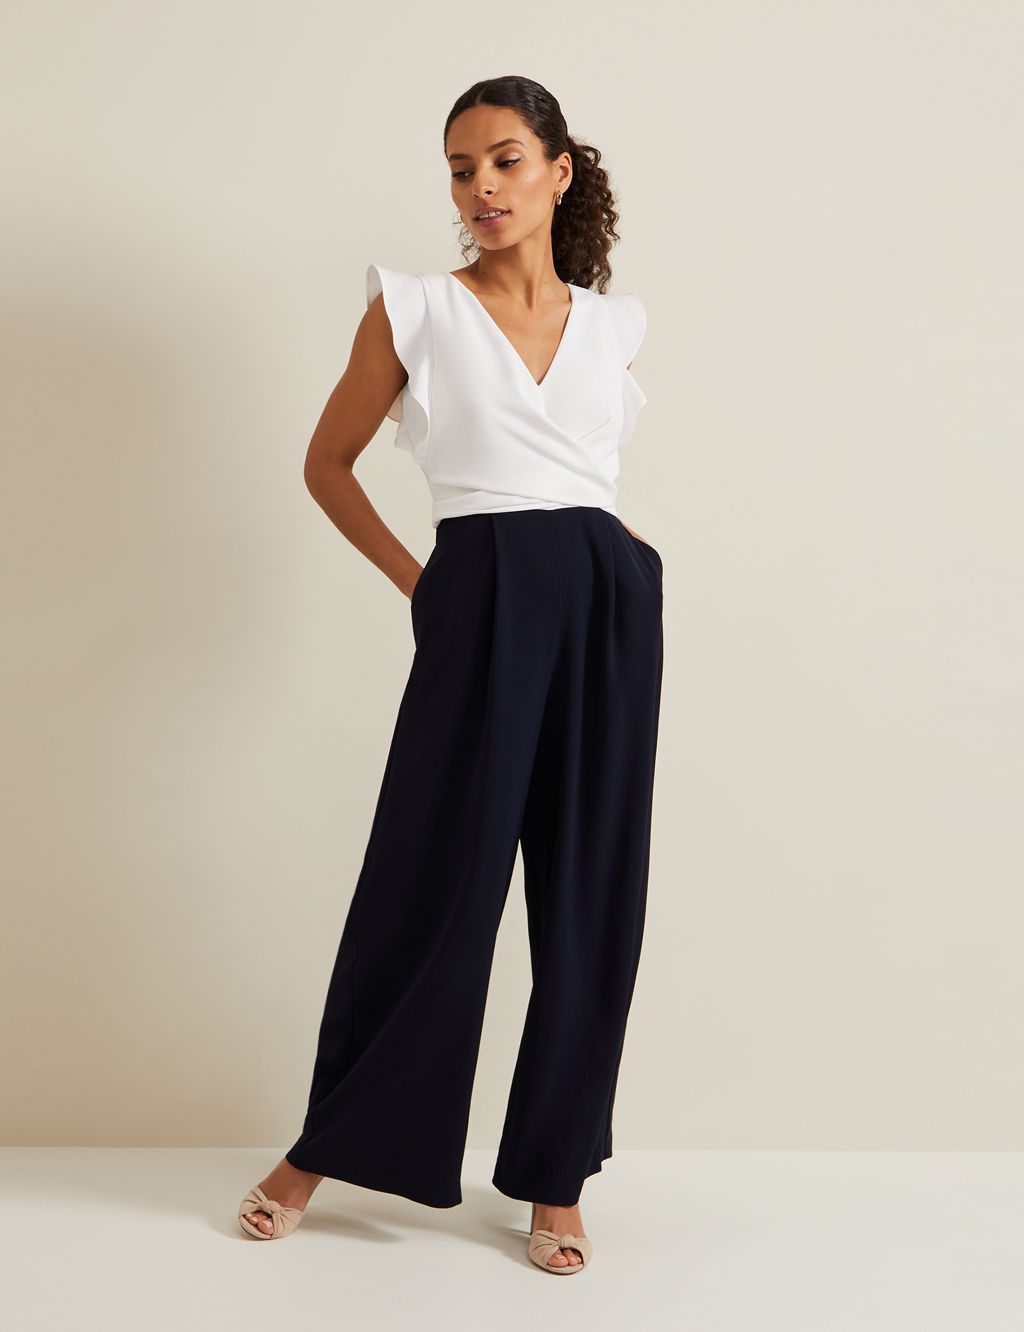 Belted Frill Detail Sleeveless Jumpsuit